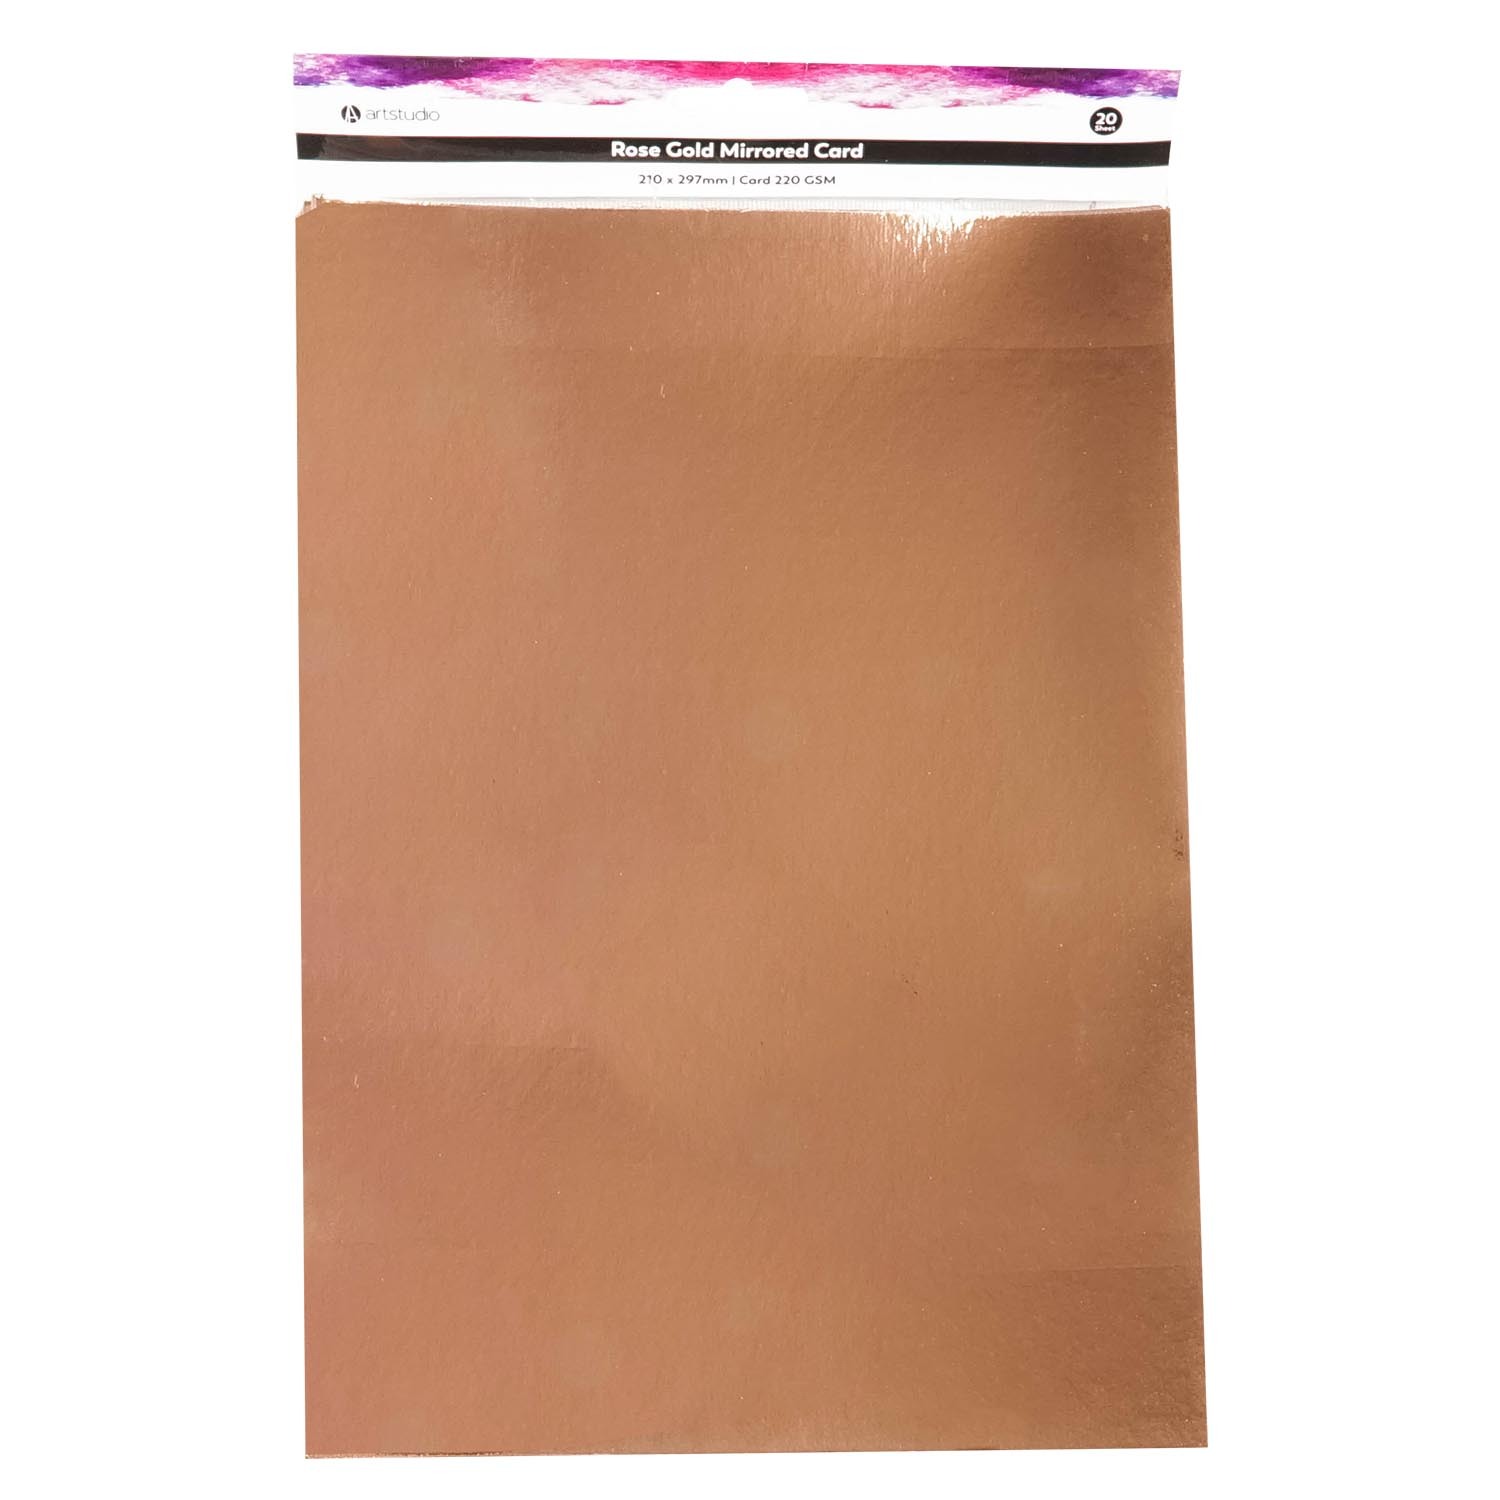 Pack of 20 Art Studio Rose Gold Mirrored Cards Image